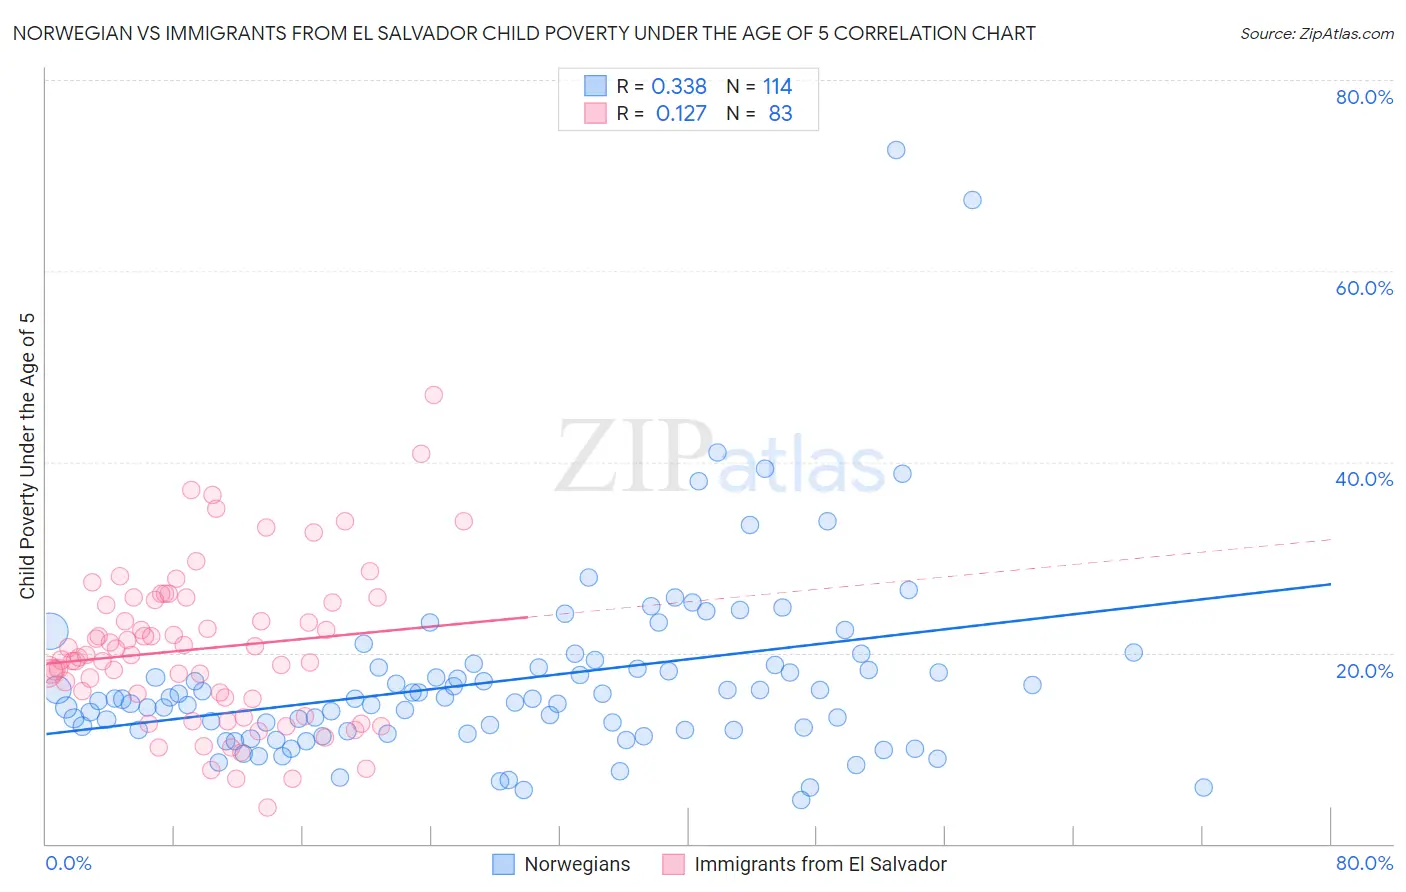 Norwegian vs Immigrants from El Salvador Child Poverty Under the Age of 5